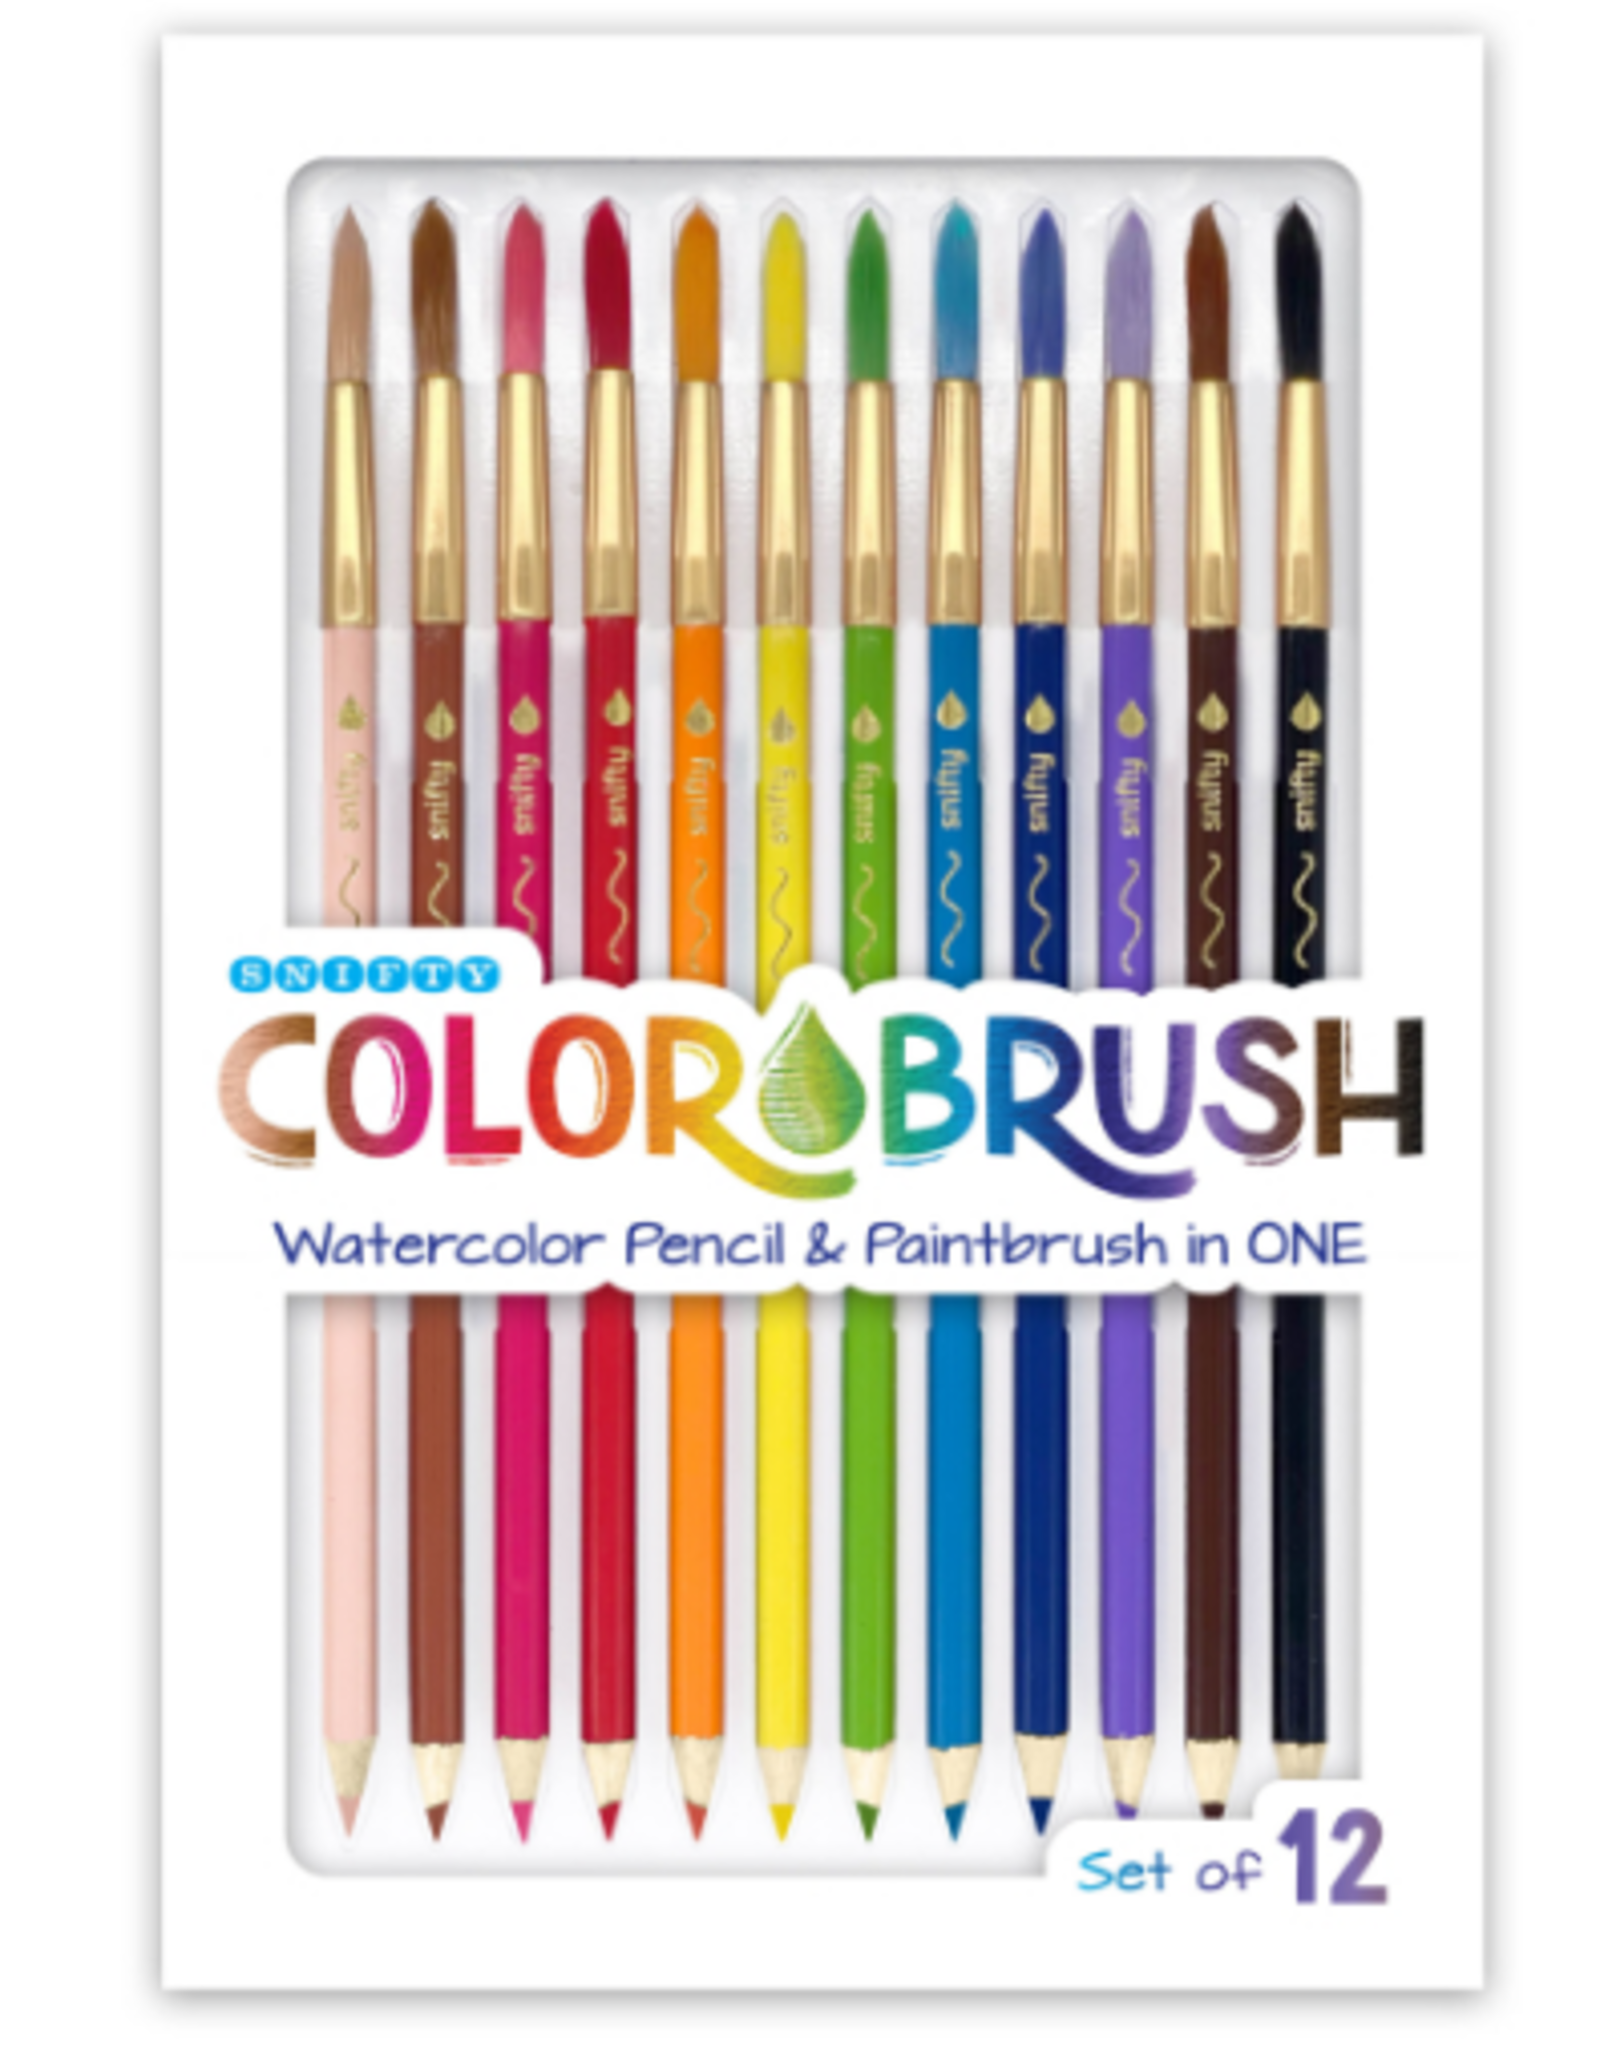 SNIFTY COLORBRUSH WATERCOLOR PENCIL &  PAINTBRUSH IN ONE SET